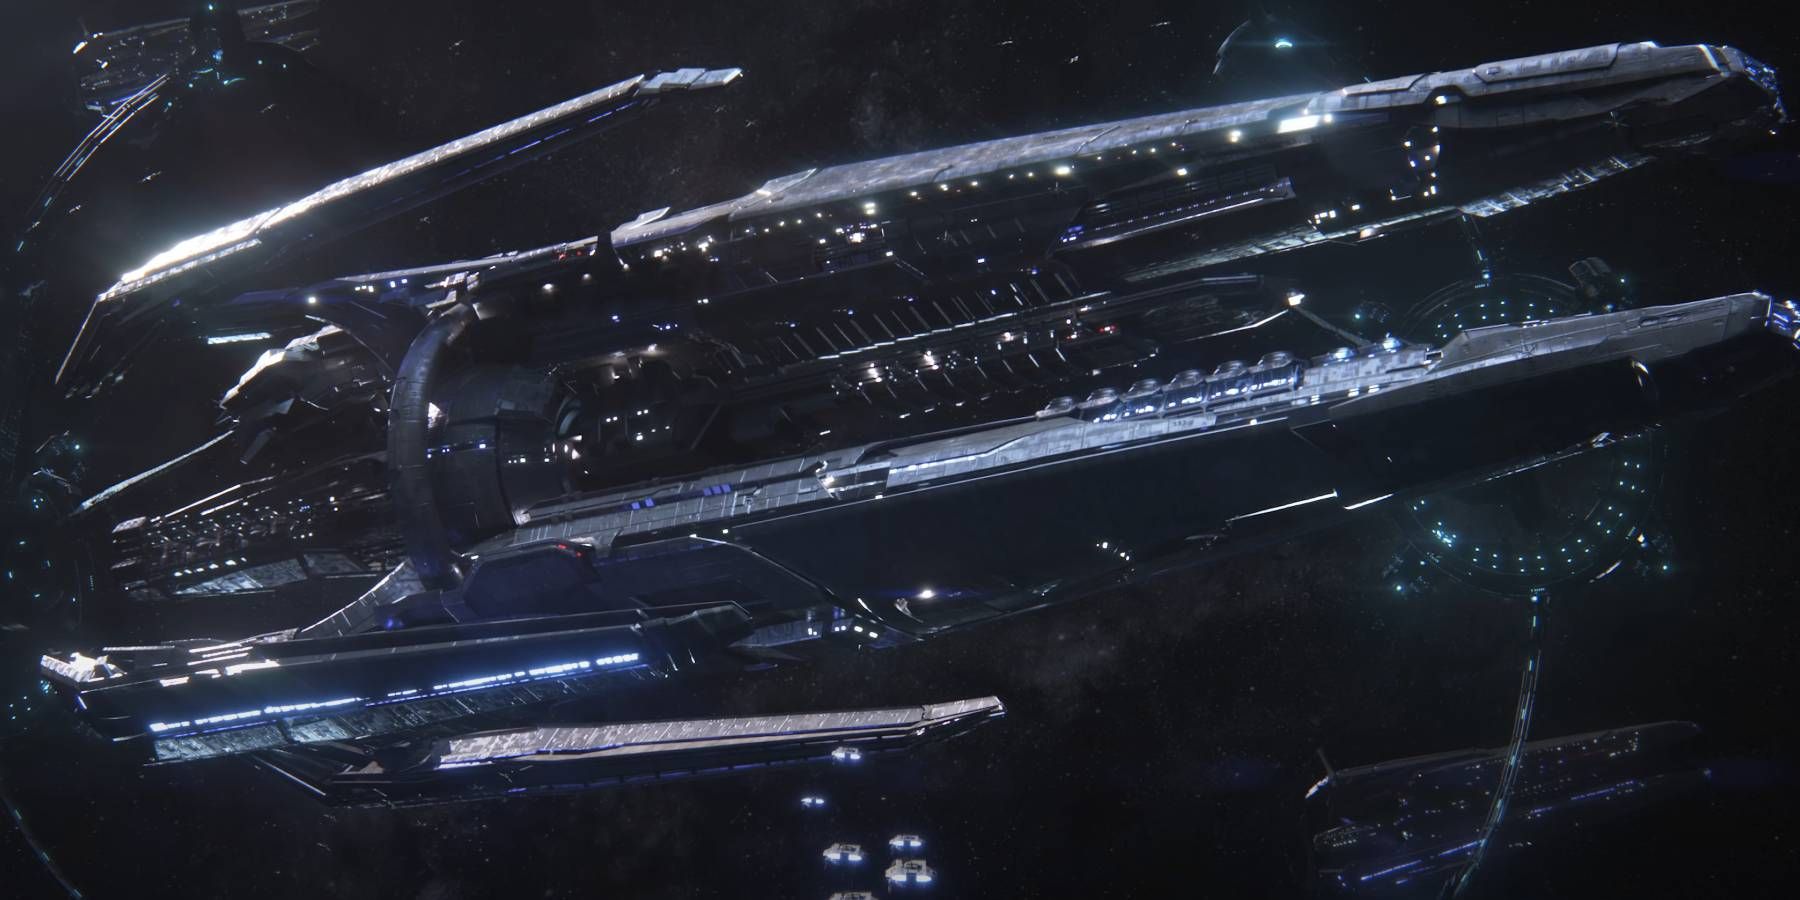 Mass Effect: Andromeda main ship used to transport Ryder and crew to new galaxy